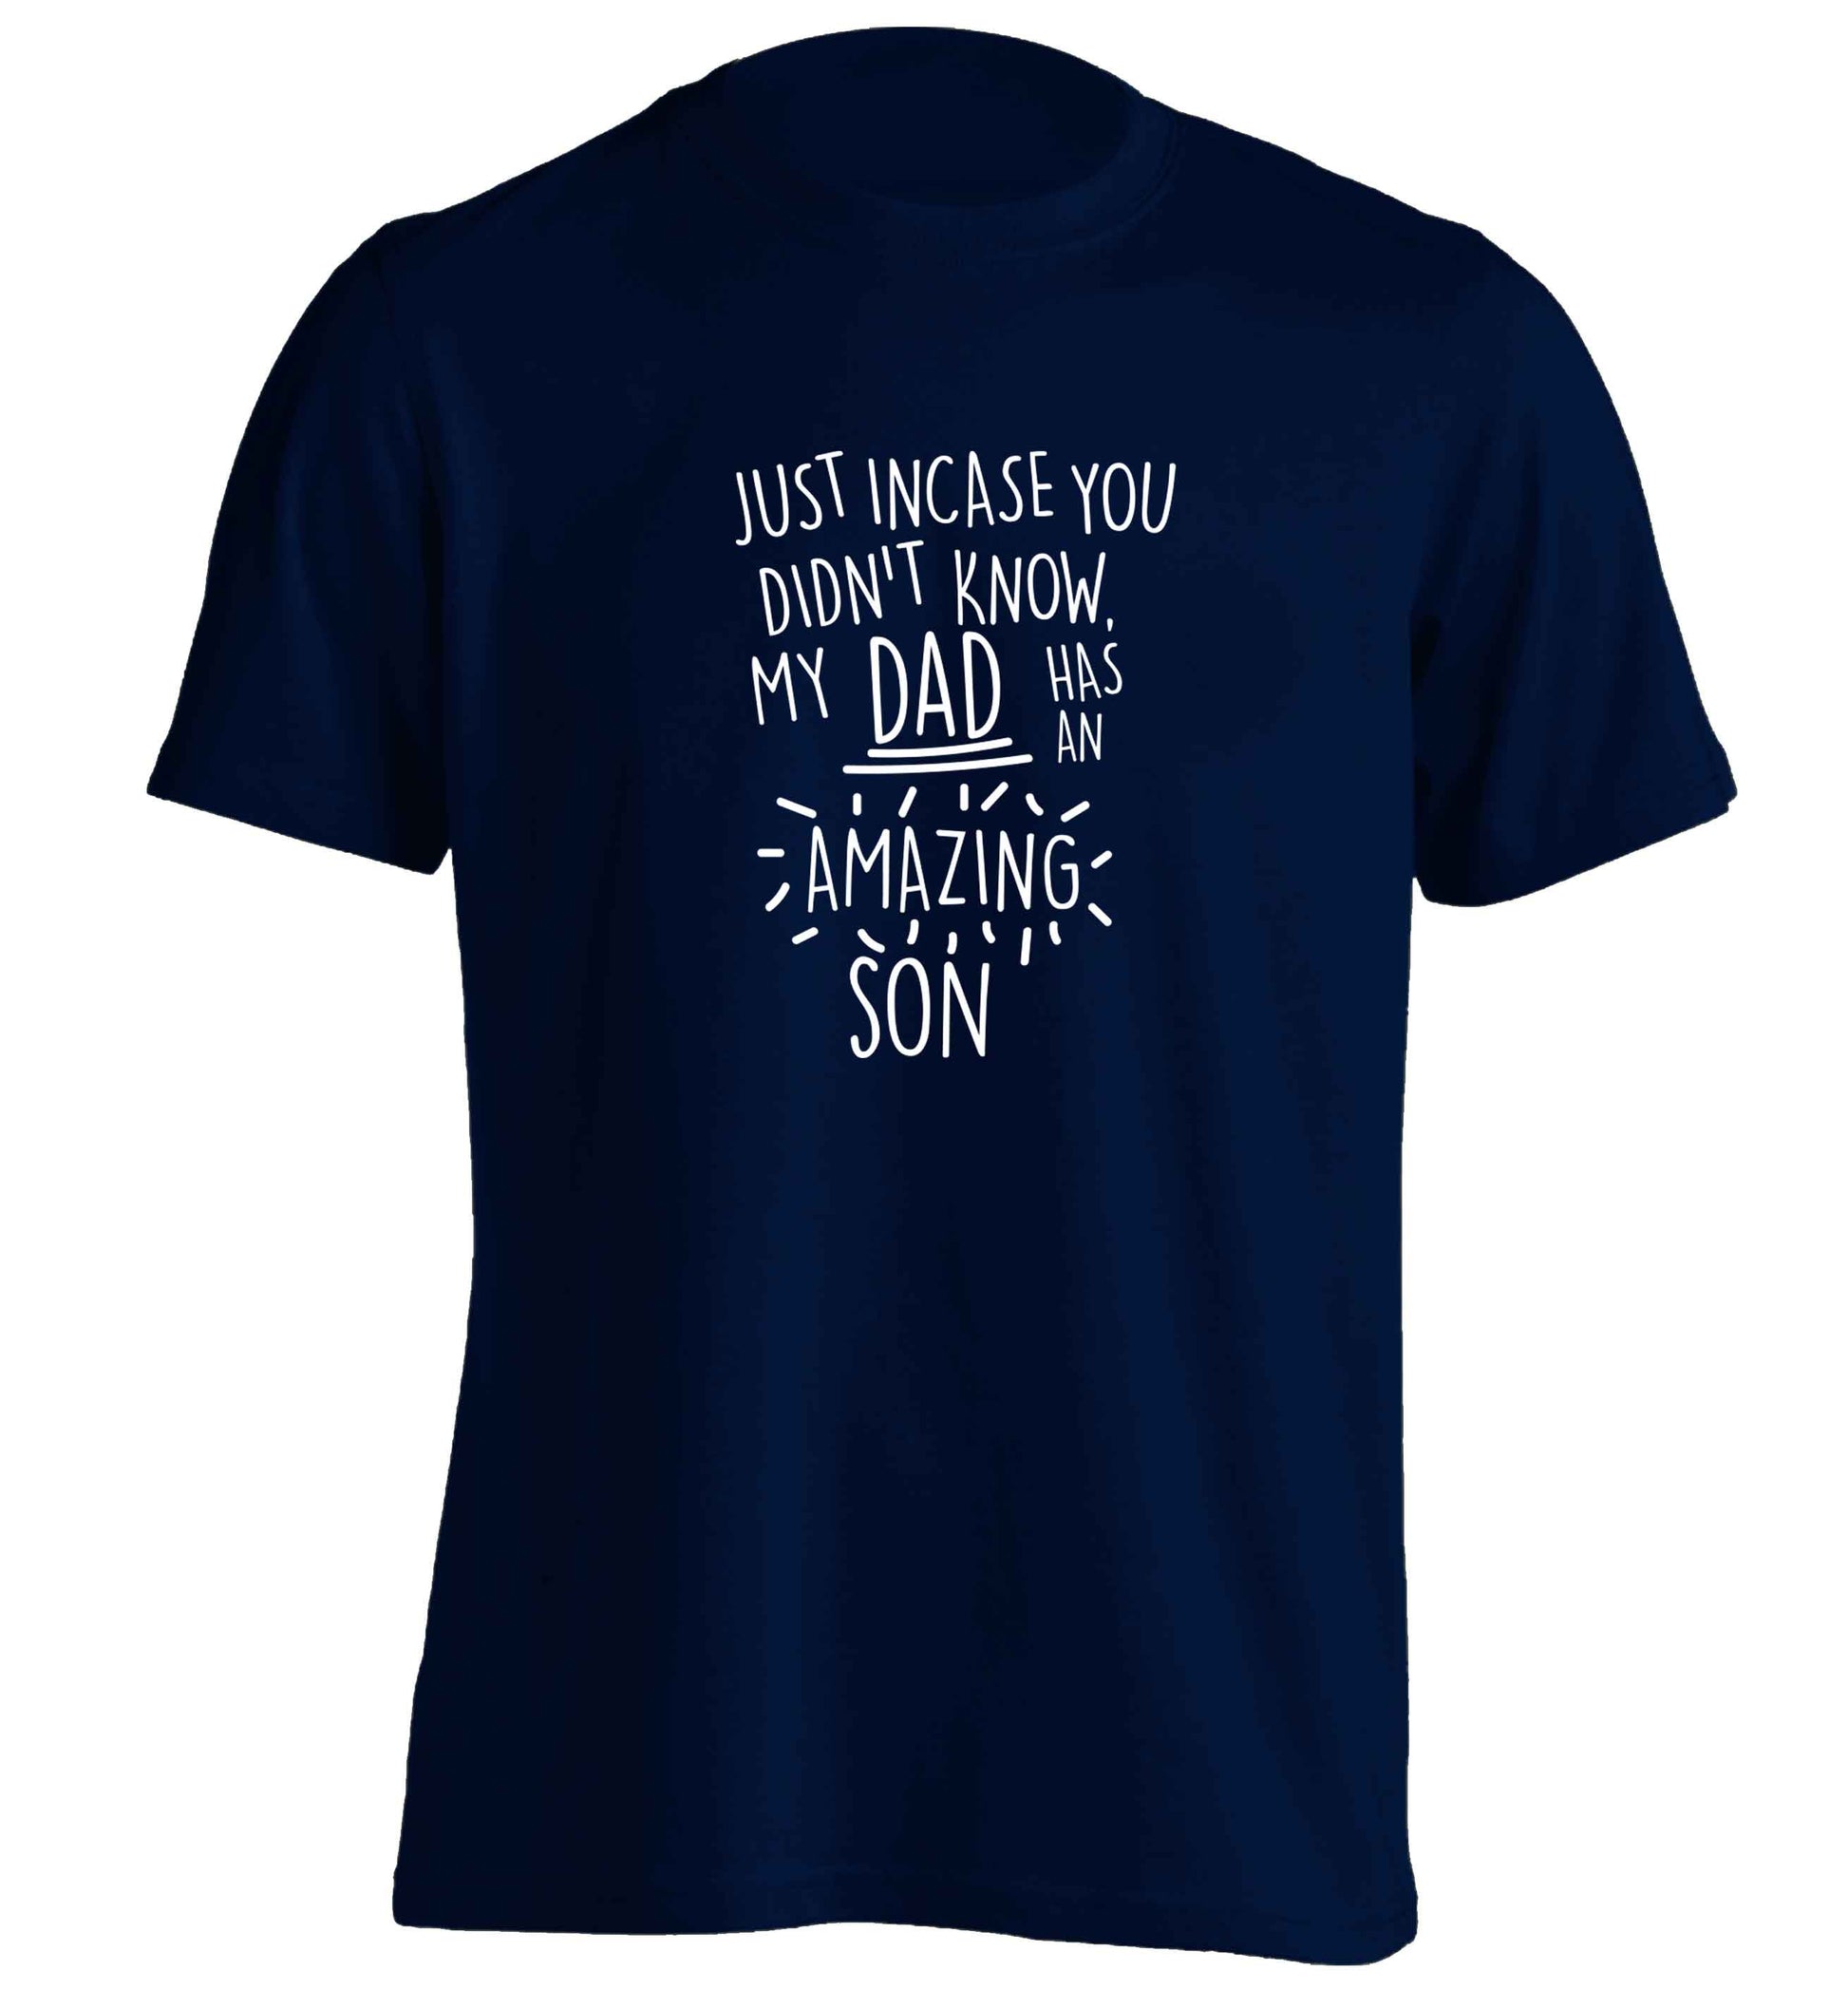 Just incase you didn't know my dad has an amazing son adults unisex navy Tshirt 2XL